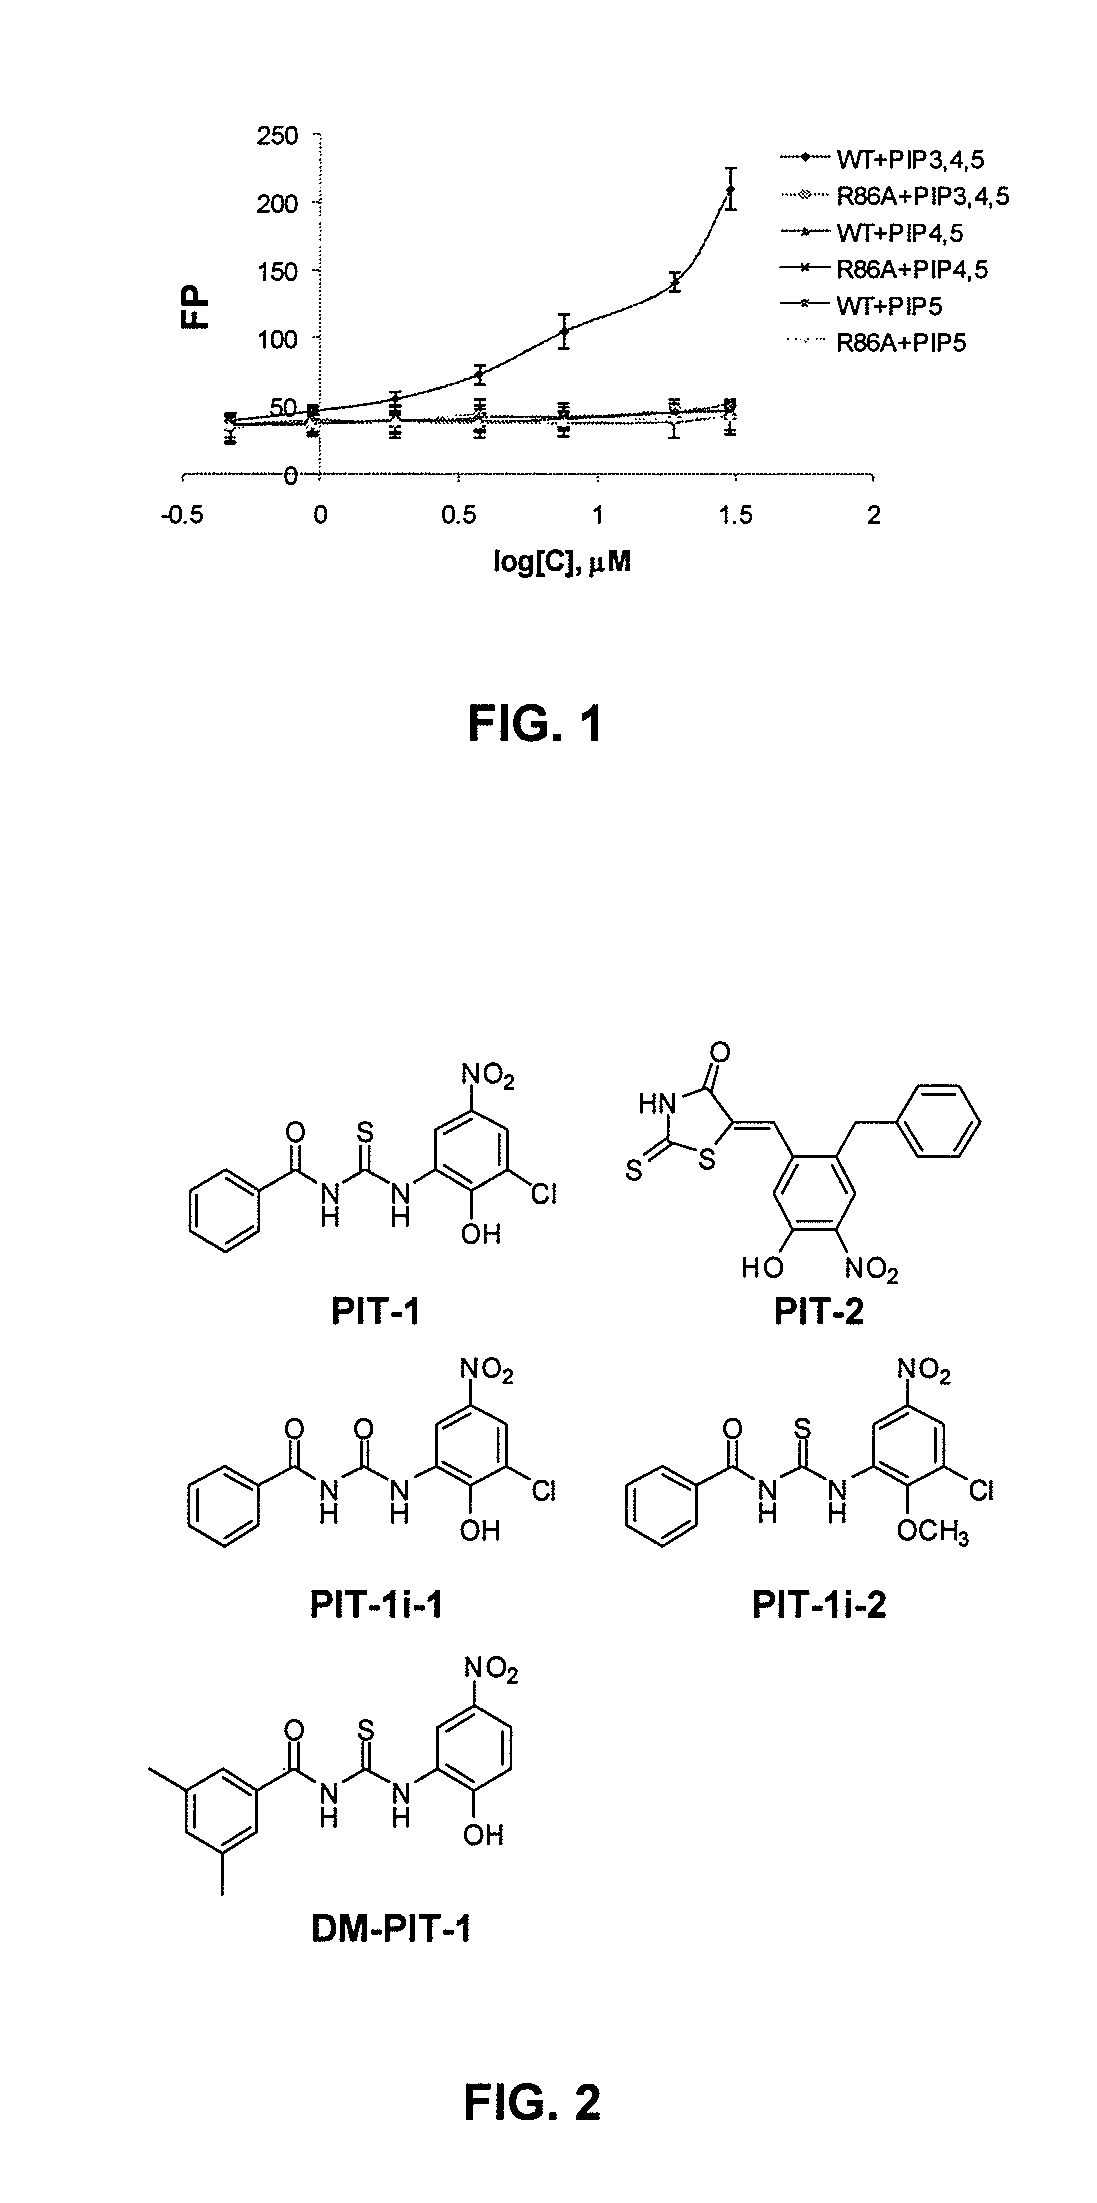 Small molecule antagonists of phosphatidylinositol-3,4,5-triphosphate (PIP3) and uses thereof